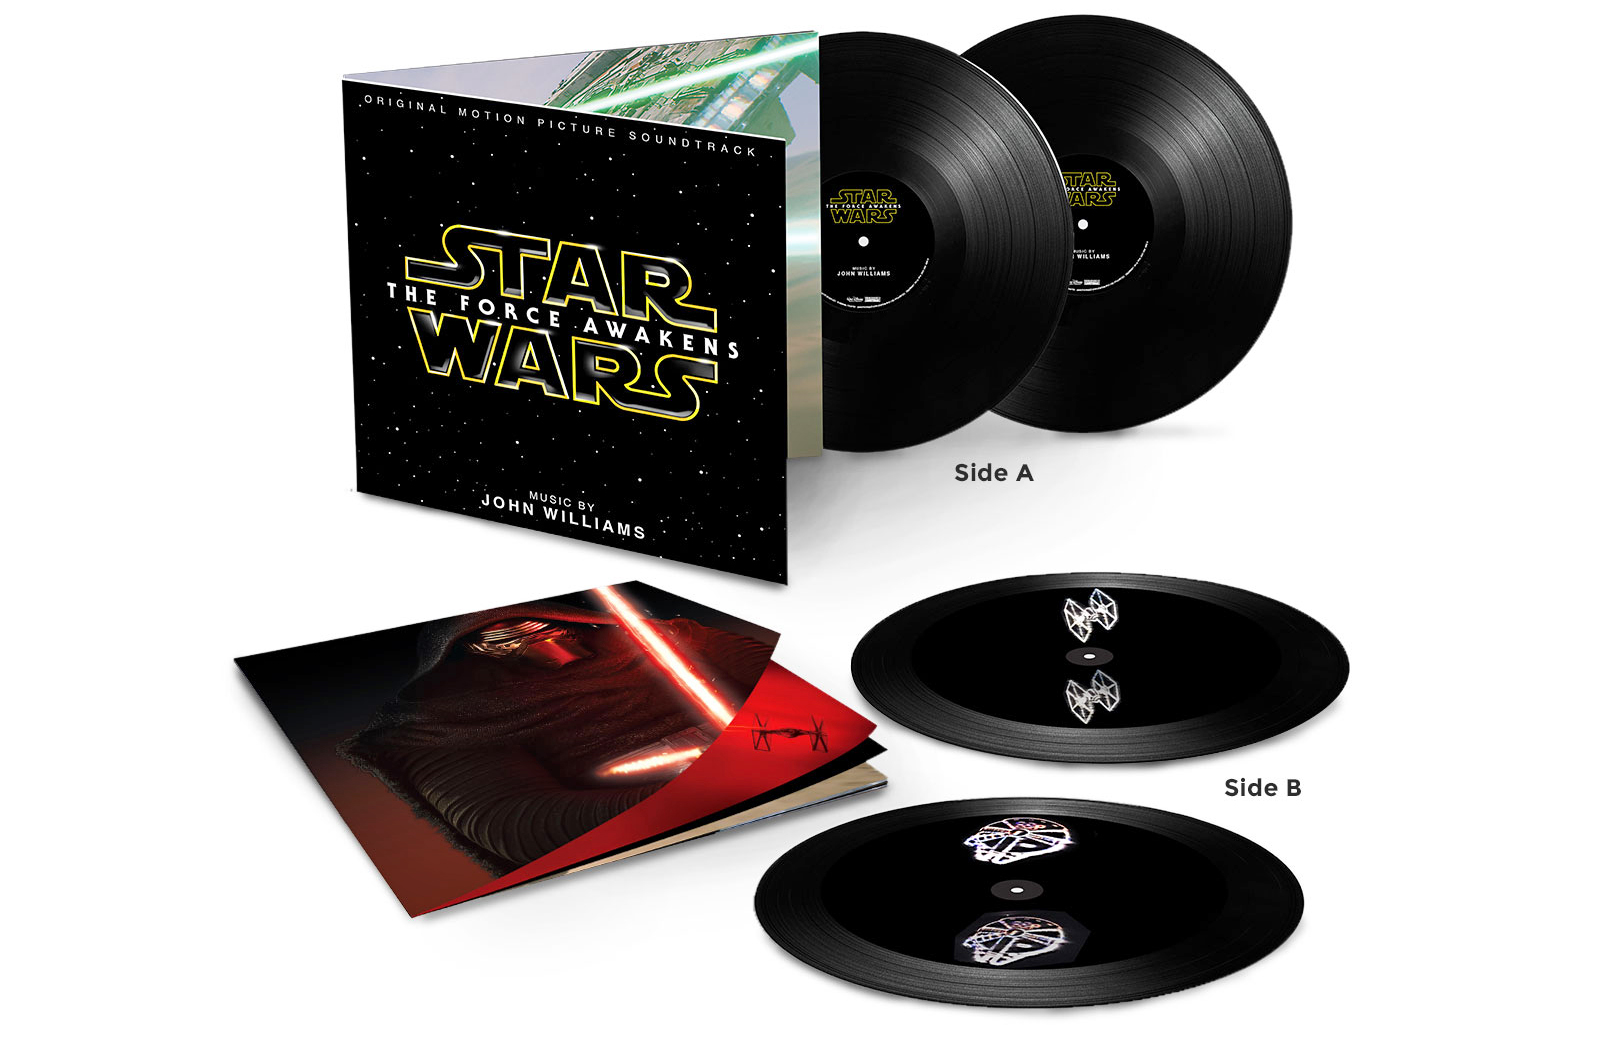 The Force Awakens’ Soundtrack On Vinyl Has 3D Spinning Holograms Etched Onto The Records